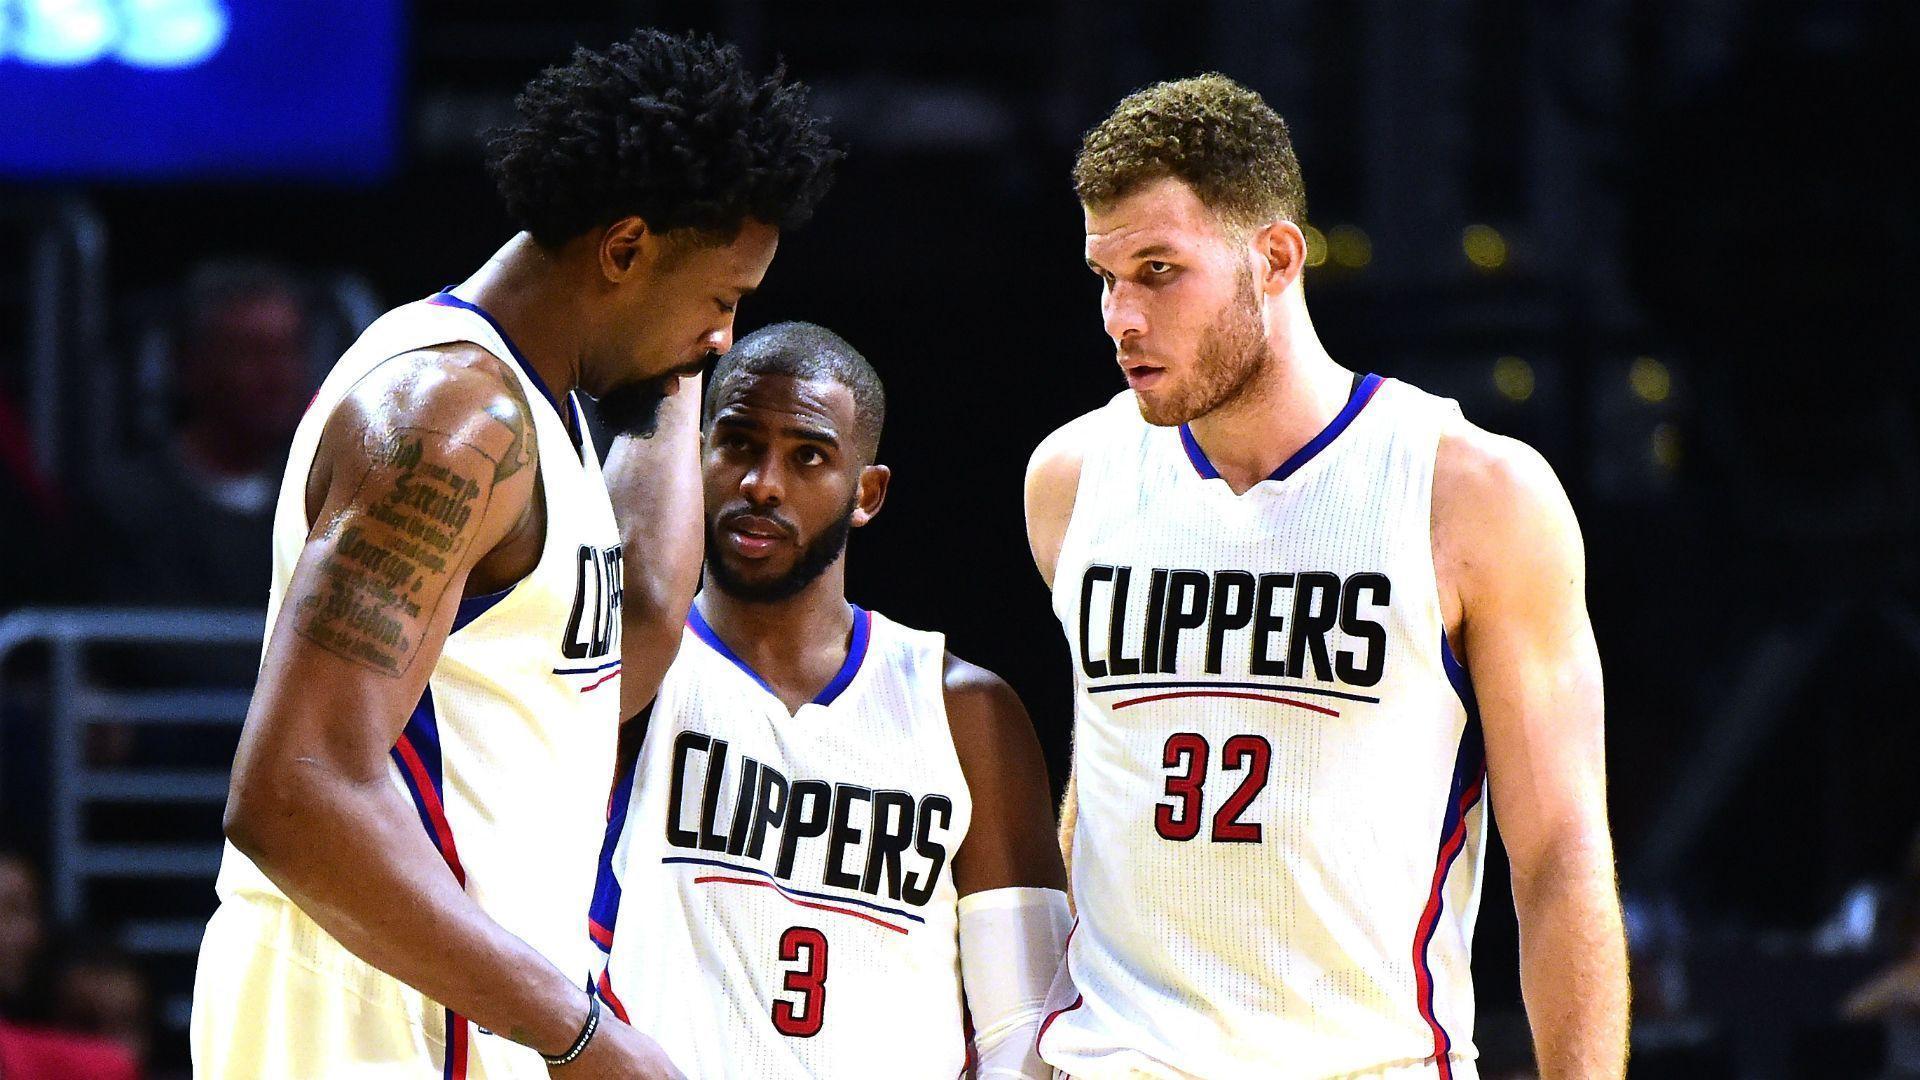 Chris Paul trade may be the best path for the Clippers' future